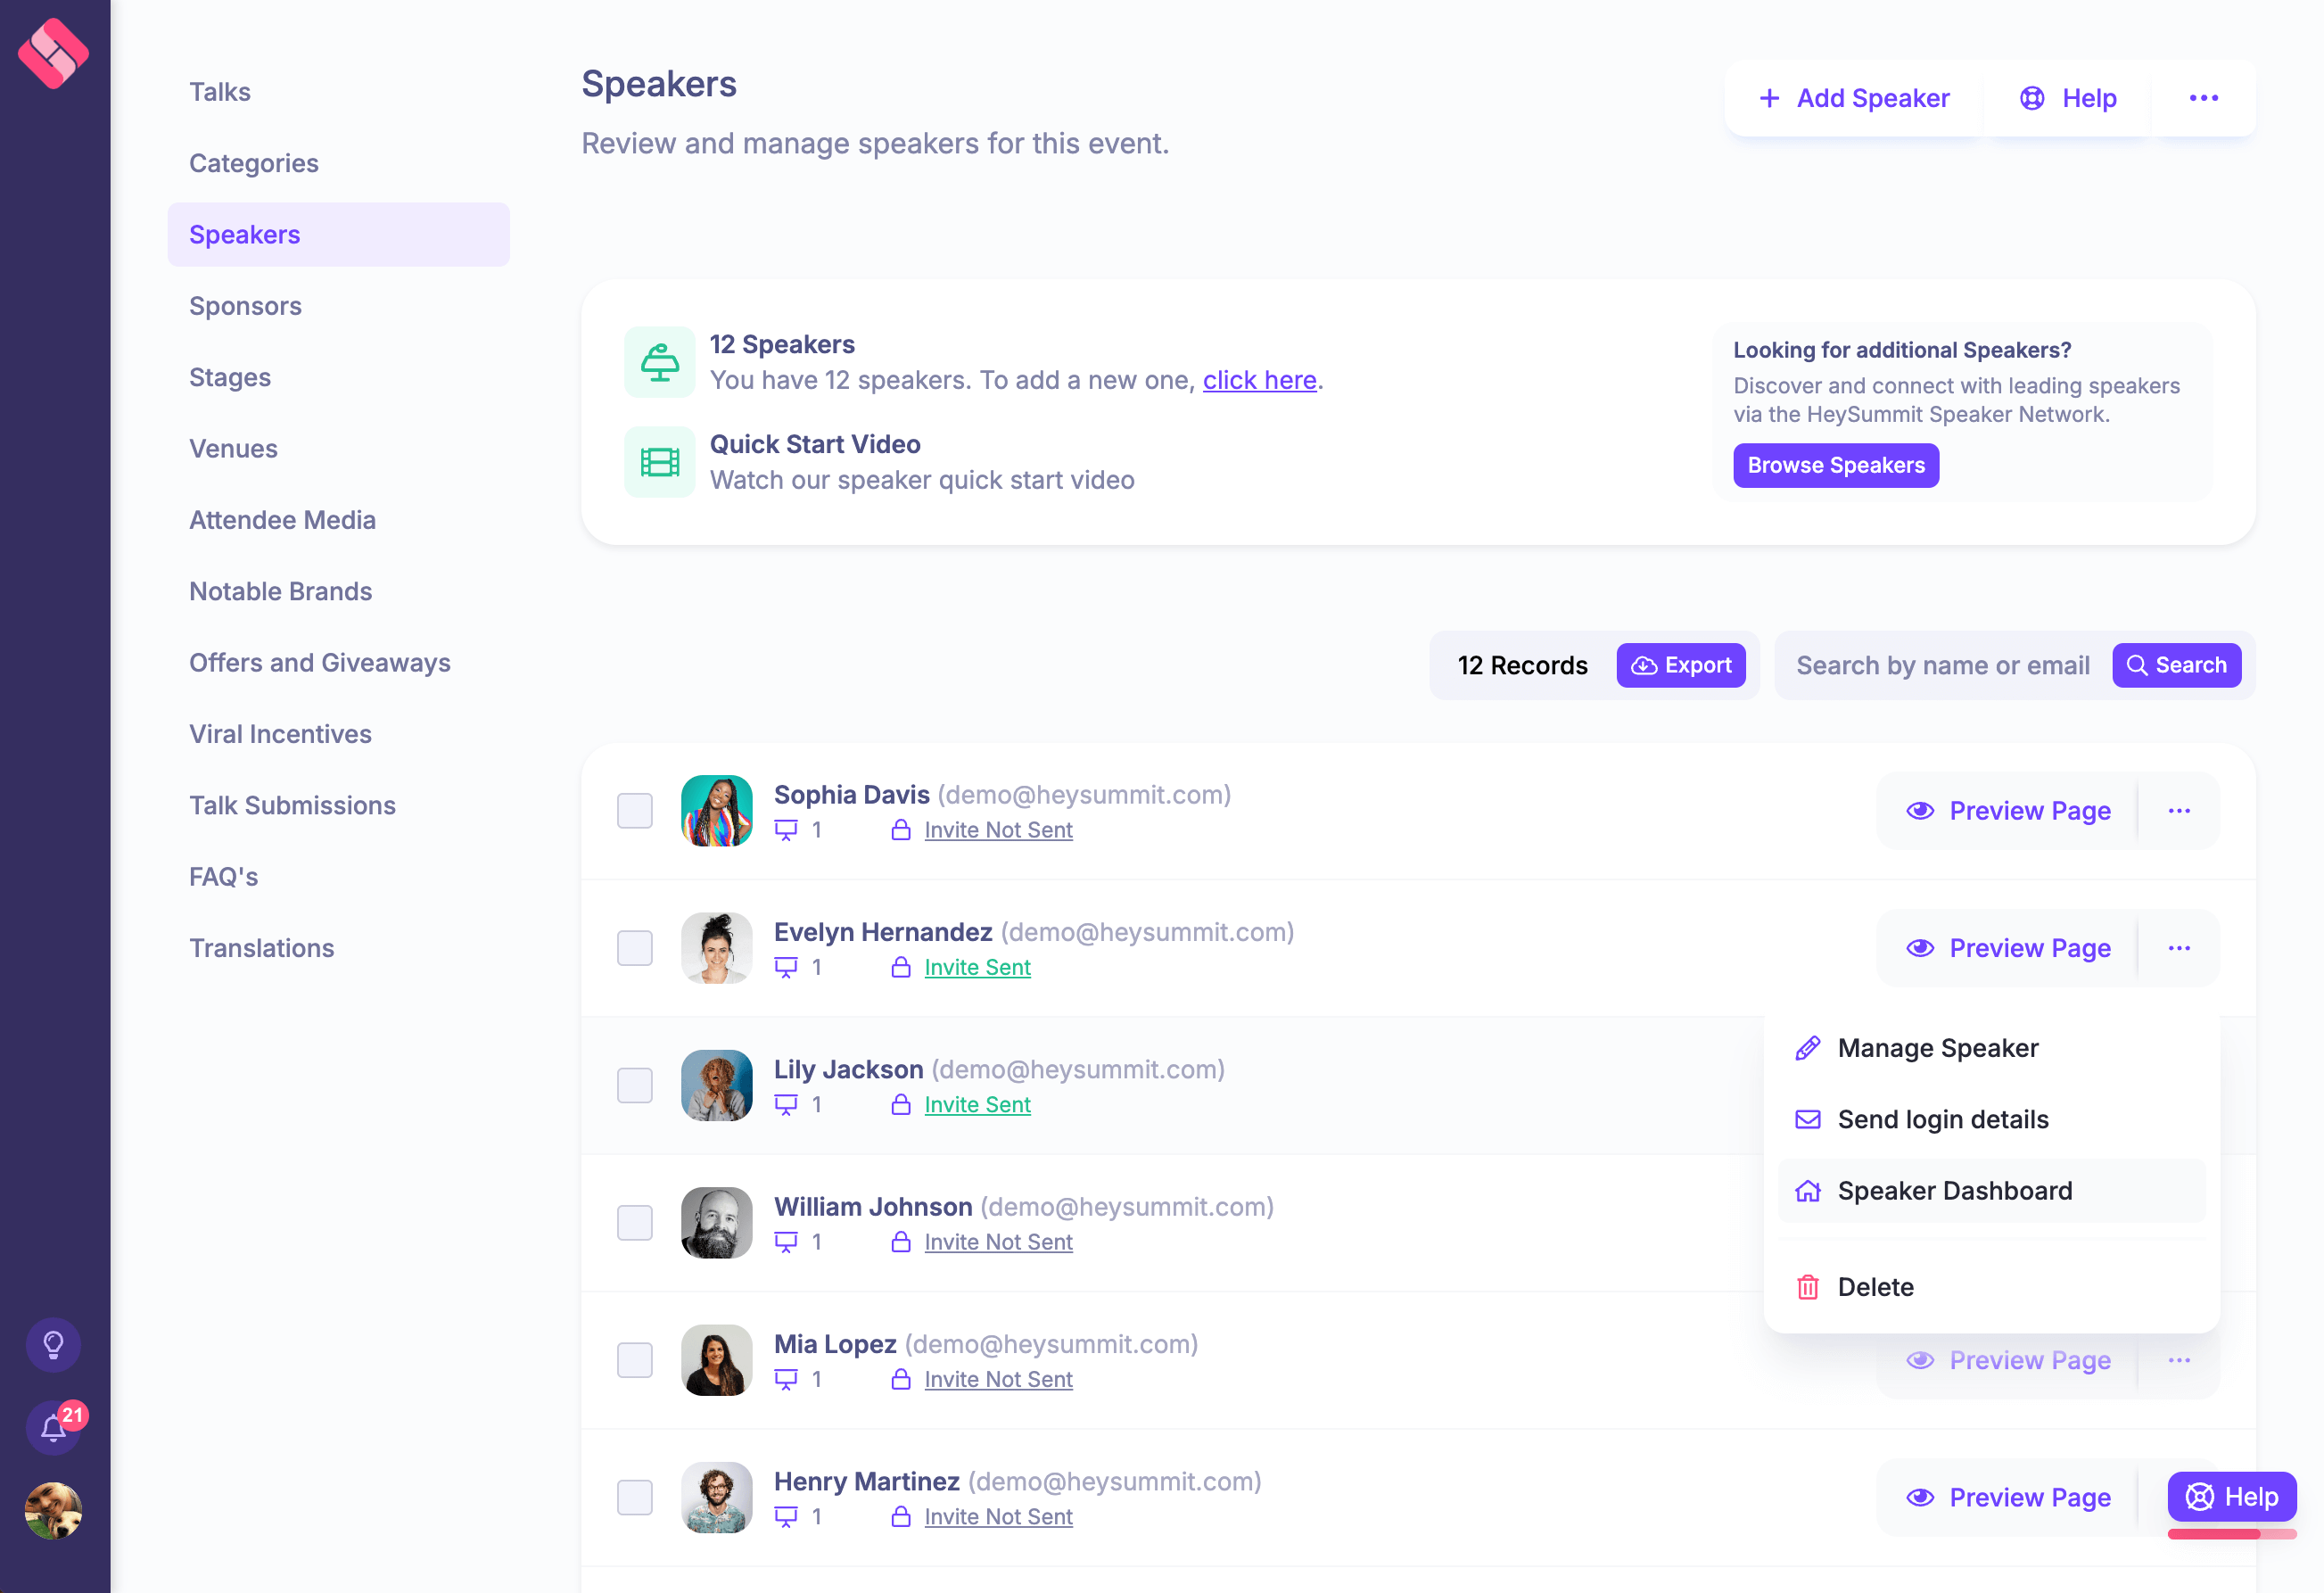 Manage your speakers from one central list. Invite them to access their own dashboard to update their bio, links and more.